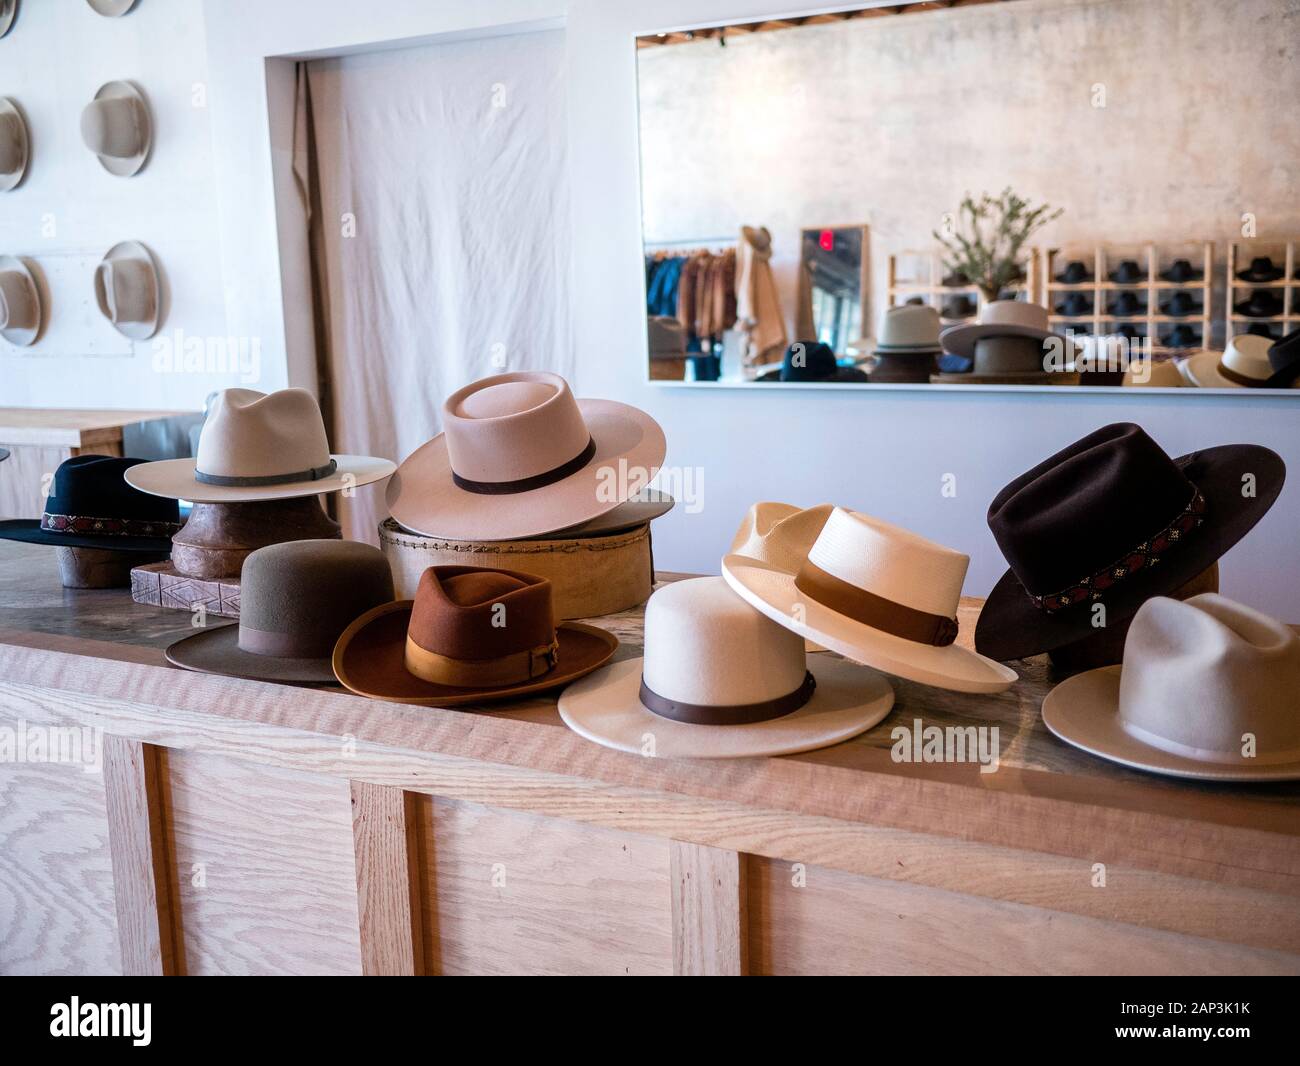 Retail counter hat display in various colors, shapes, and styles Stock  Photo - Alamy